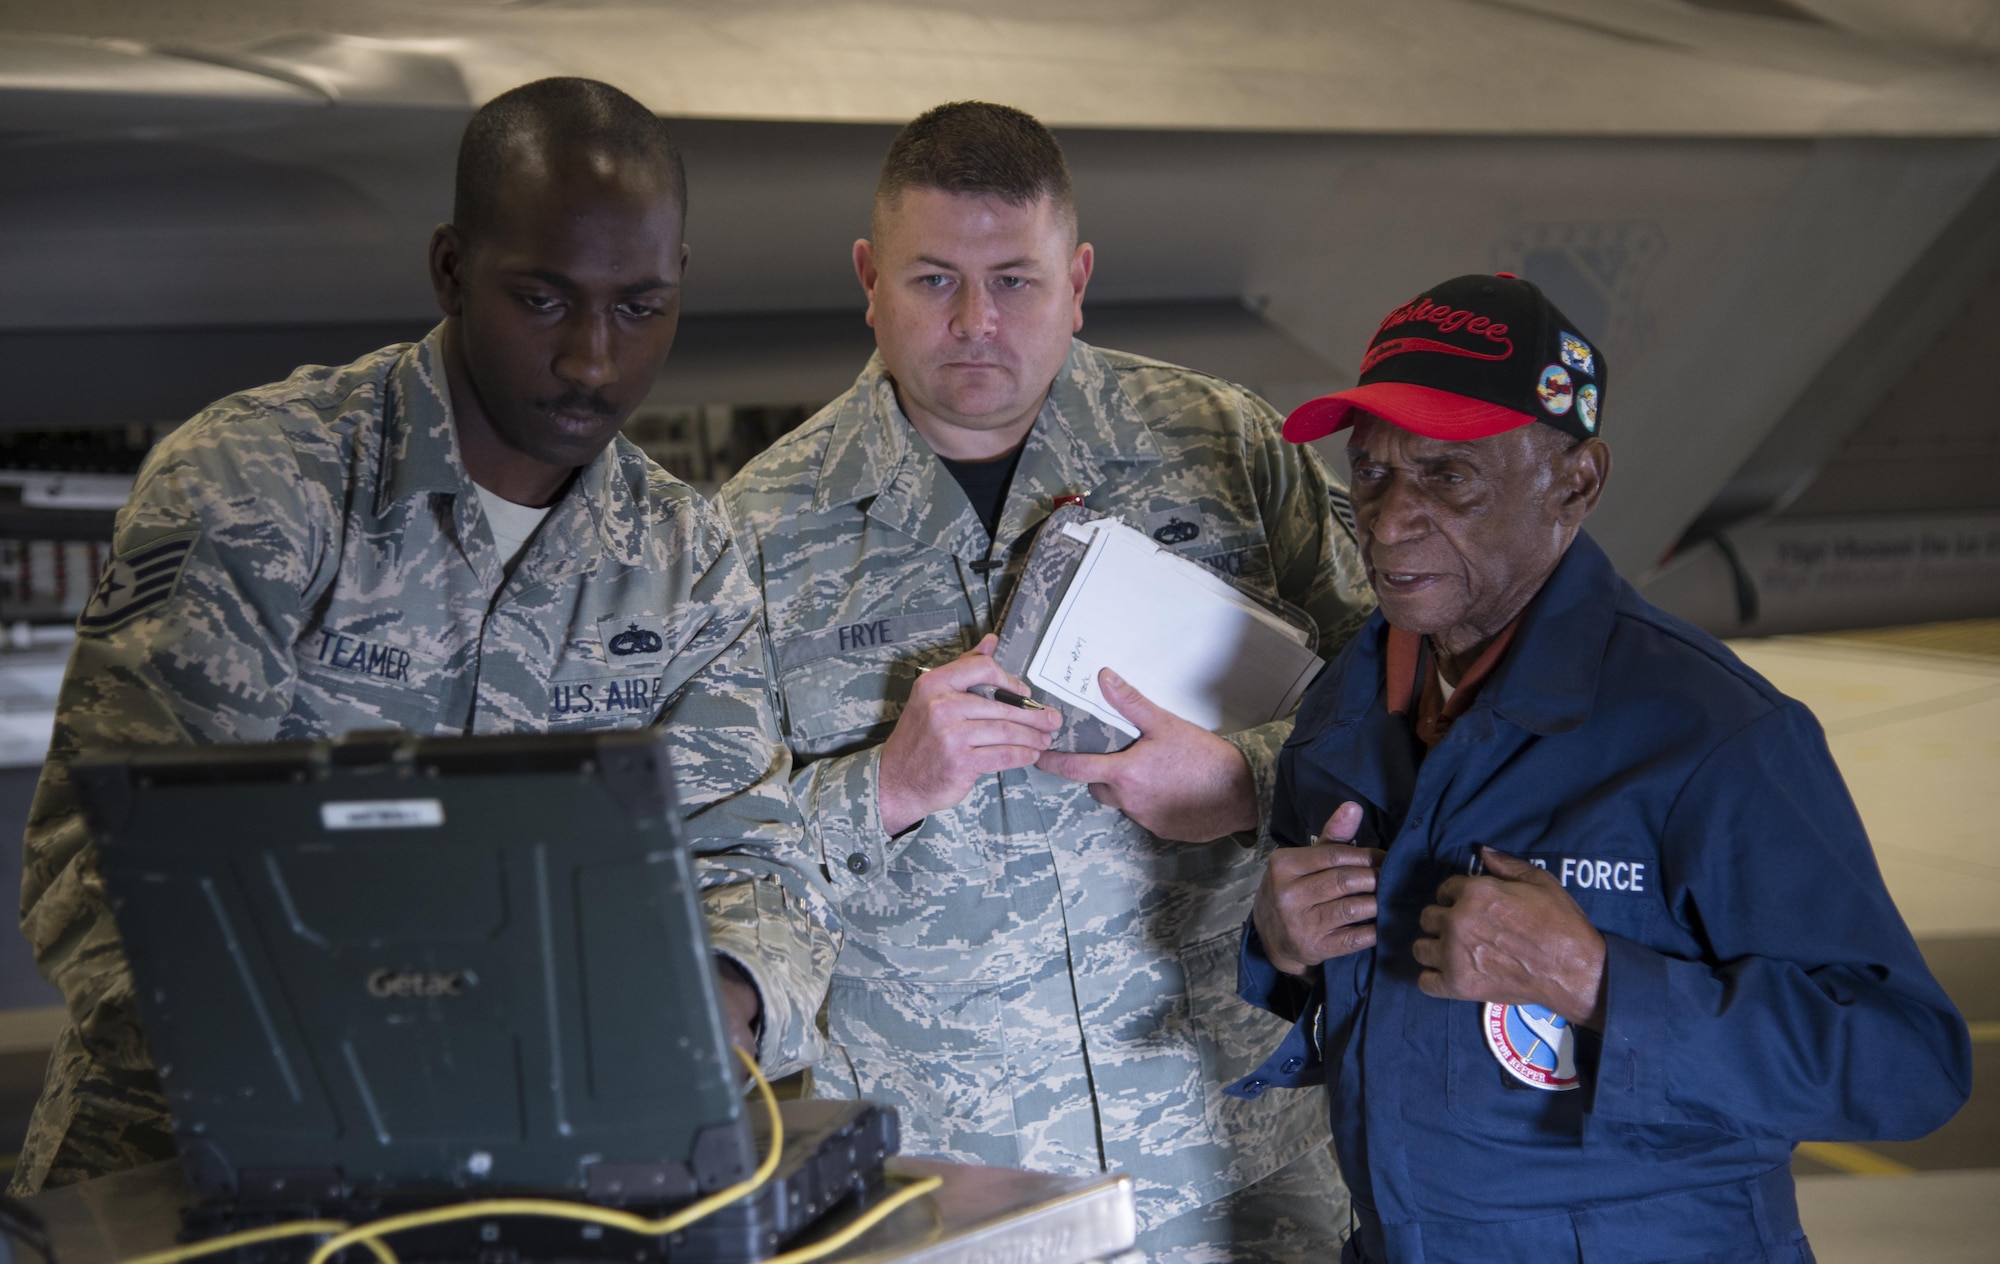 U.S. Air Force Staff Sgt. Stephen Teamer, 477th Aircraft Maintenance Squadron crew chief, operates a portable maintenance aid during a quality insurance inspection with Army Air Corps Staff Sgt. Leslie Edwards, a Tuskegee Airman of the 477th Bombardment Group, and Tech. Sgt. Jeremiah Frye, 477th FG quality assurance inspector, at Joint Base Elmendorf-Richardson, Alaska, Oct. 14, 2017. Edwards accompanied Frye for his 5,000th quality assurance inspection, a milestone he reached in nine years which typically takes 28 years to accomplish. In 2007, the 477th Bombardment Group became the 477th Fighter Group, bringing with it the legacy of Tuskegee Airmen to Alaska. (U.S. Air Force photo by Senior Airman Curt Beach)